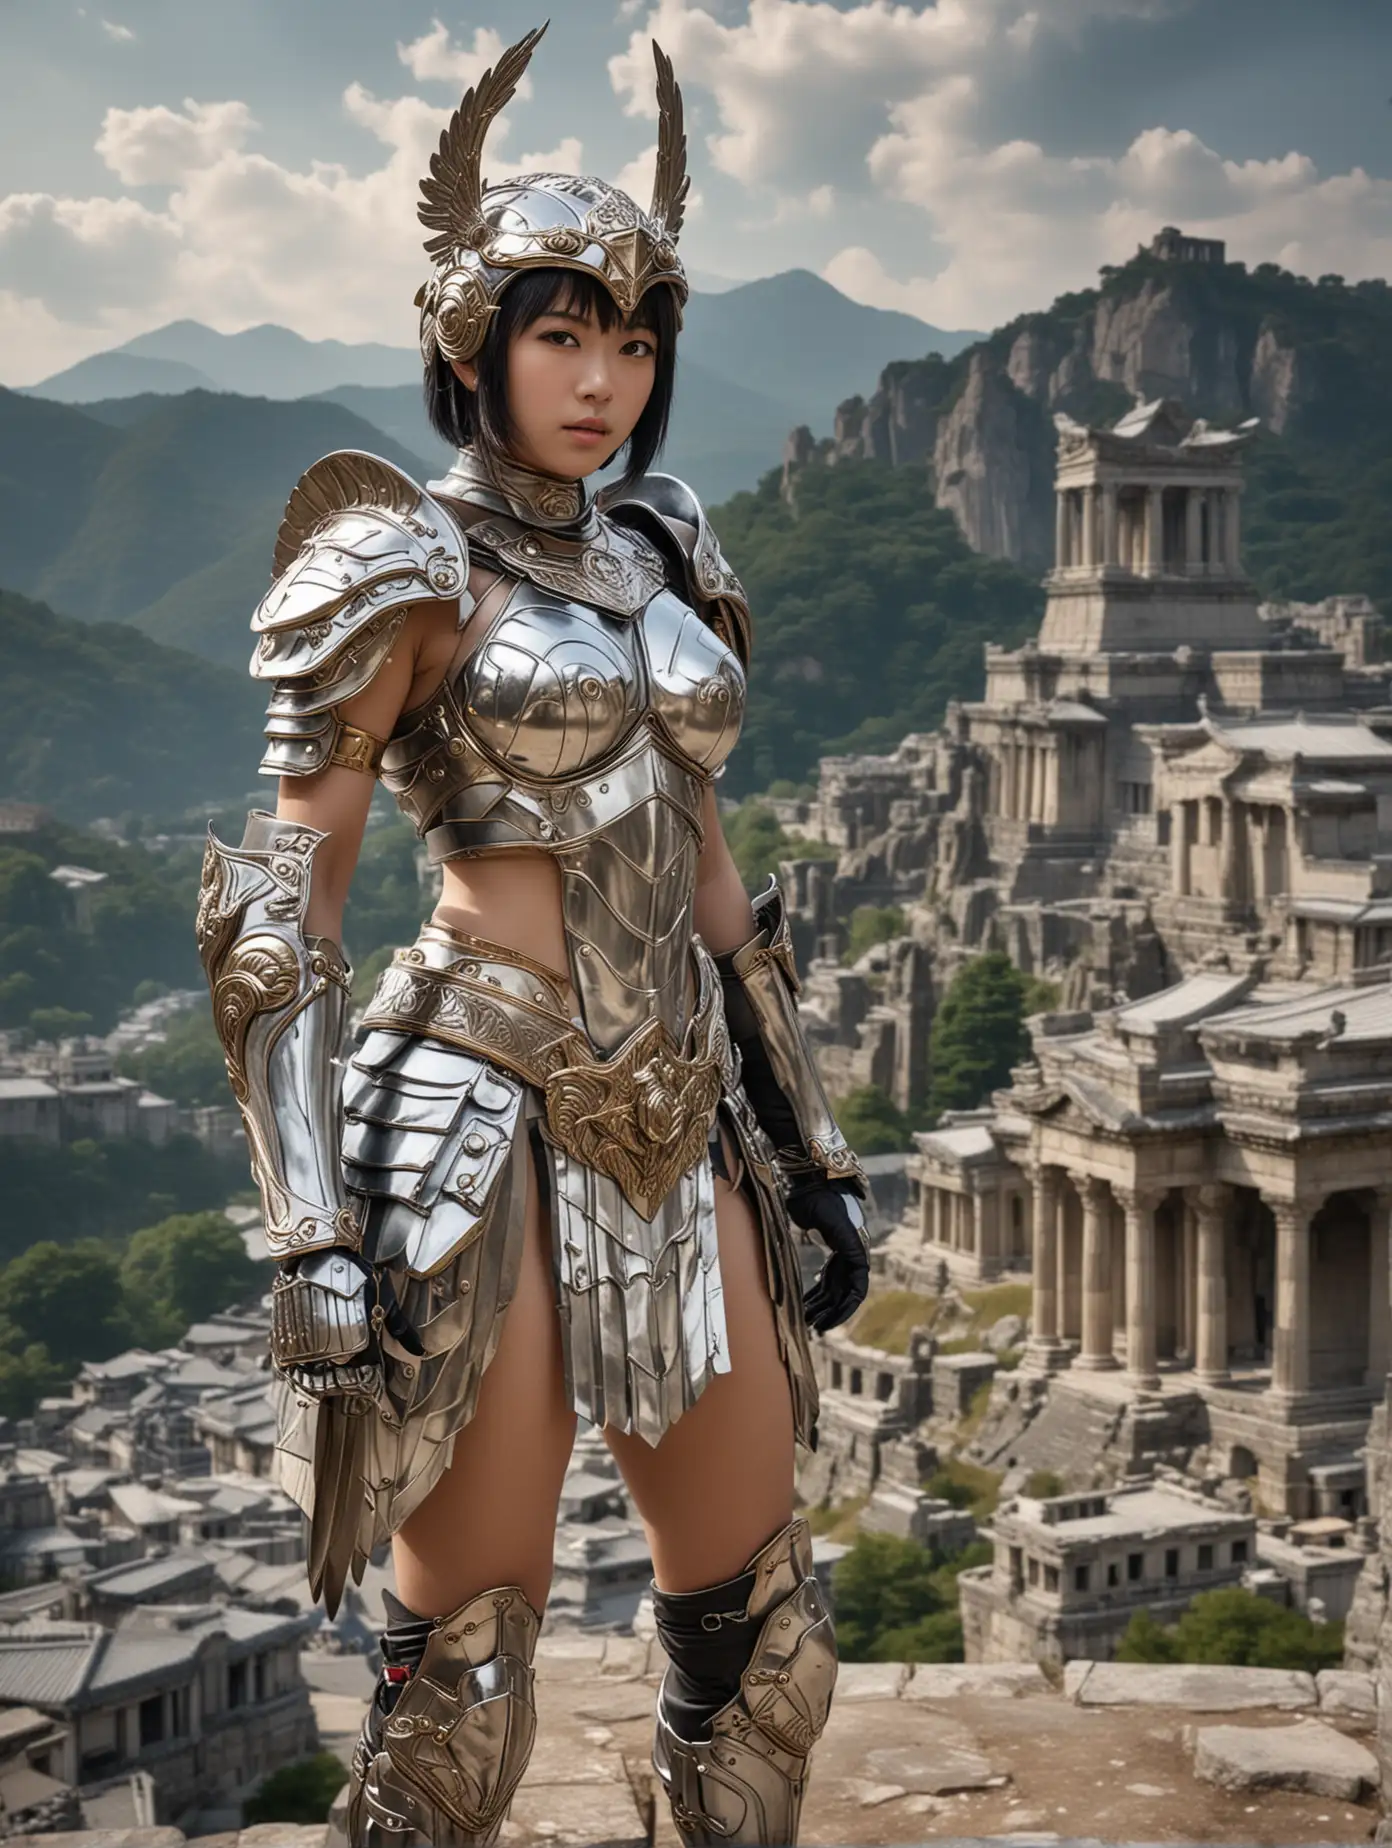 Sexy Japanese Short Hair Girl in Pegasus Armor with Greek Temple Background